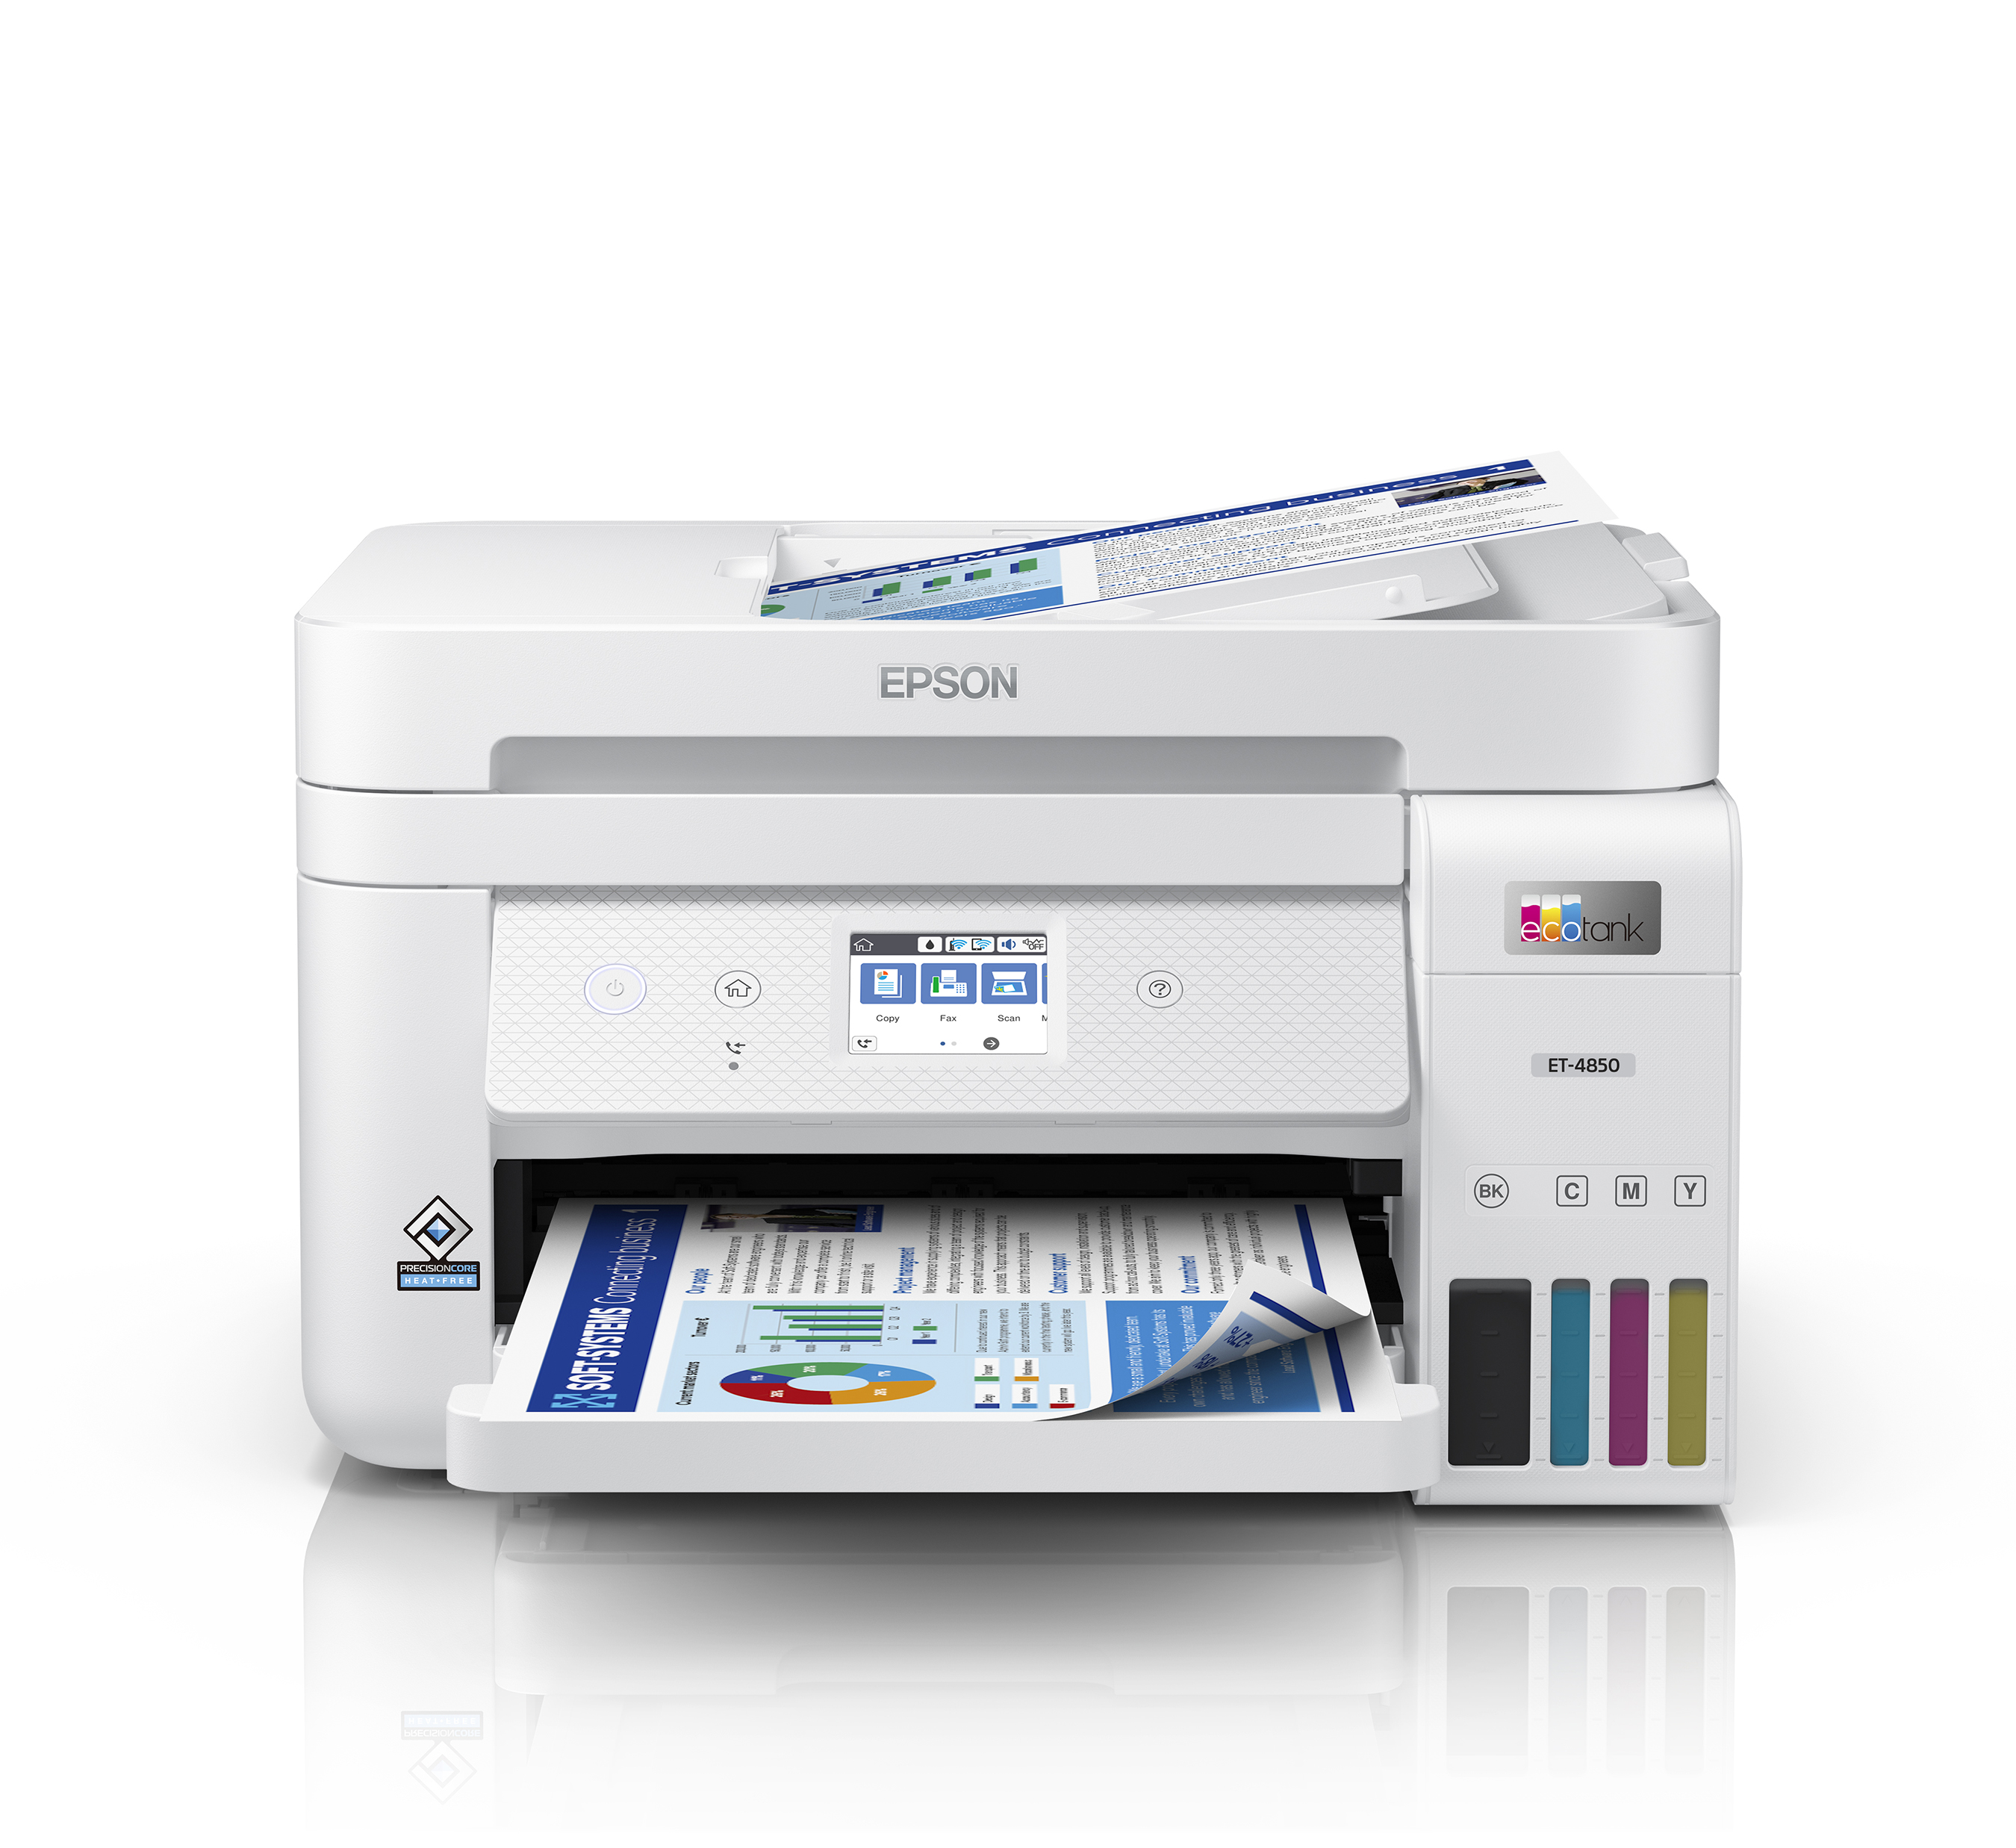 The EcoTank ET-4850 offers premium productivity features - fax, productive paper handling, a high-resolution flatbed scanner, and a convenient 2.4" color touchscreen, making it the best option for office printing.